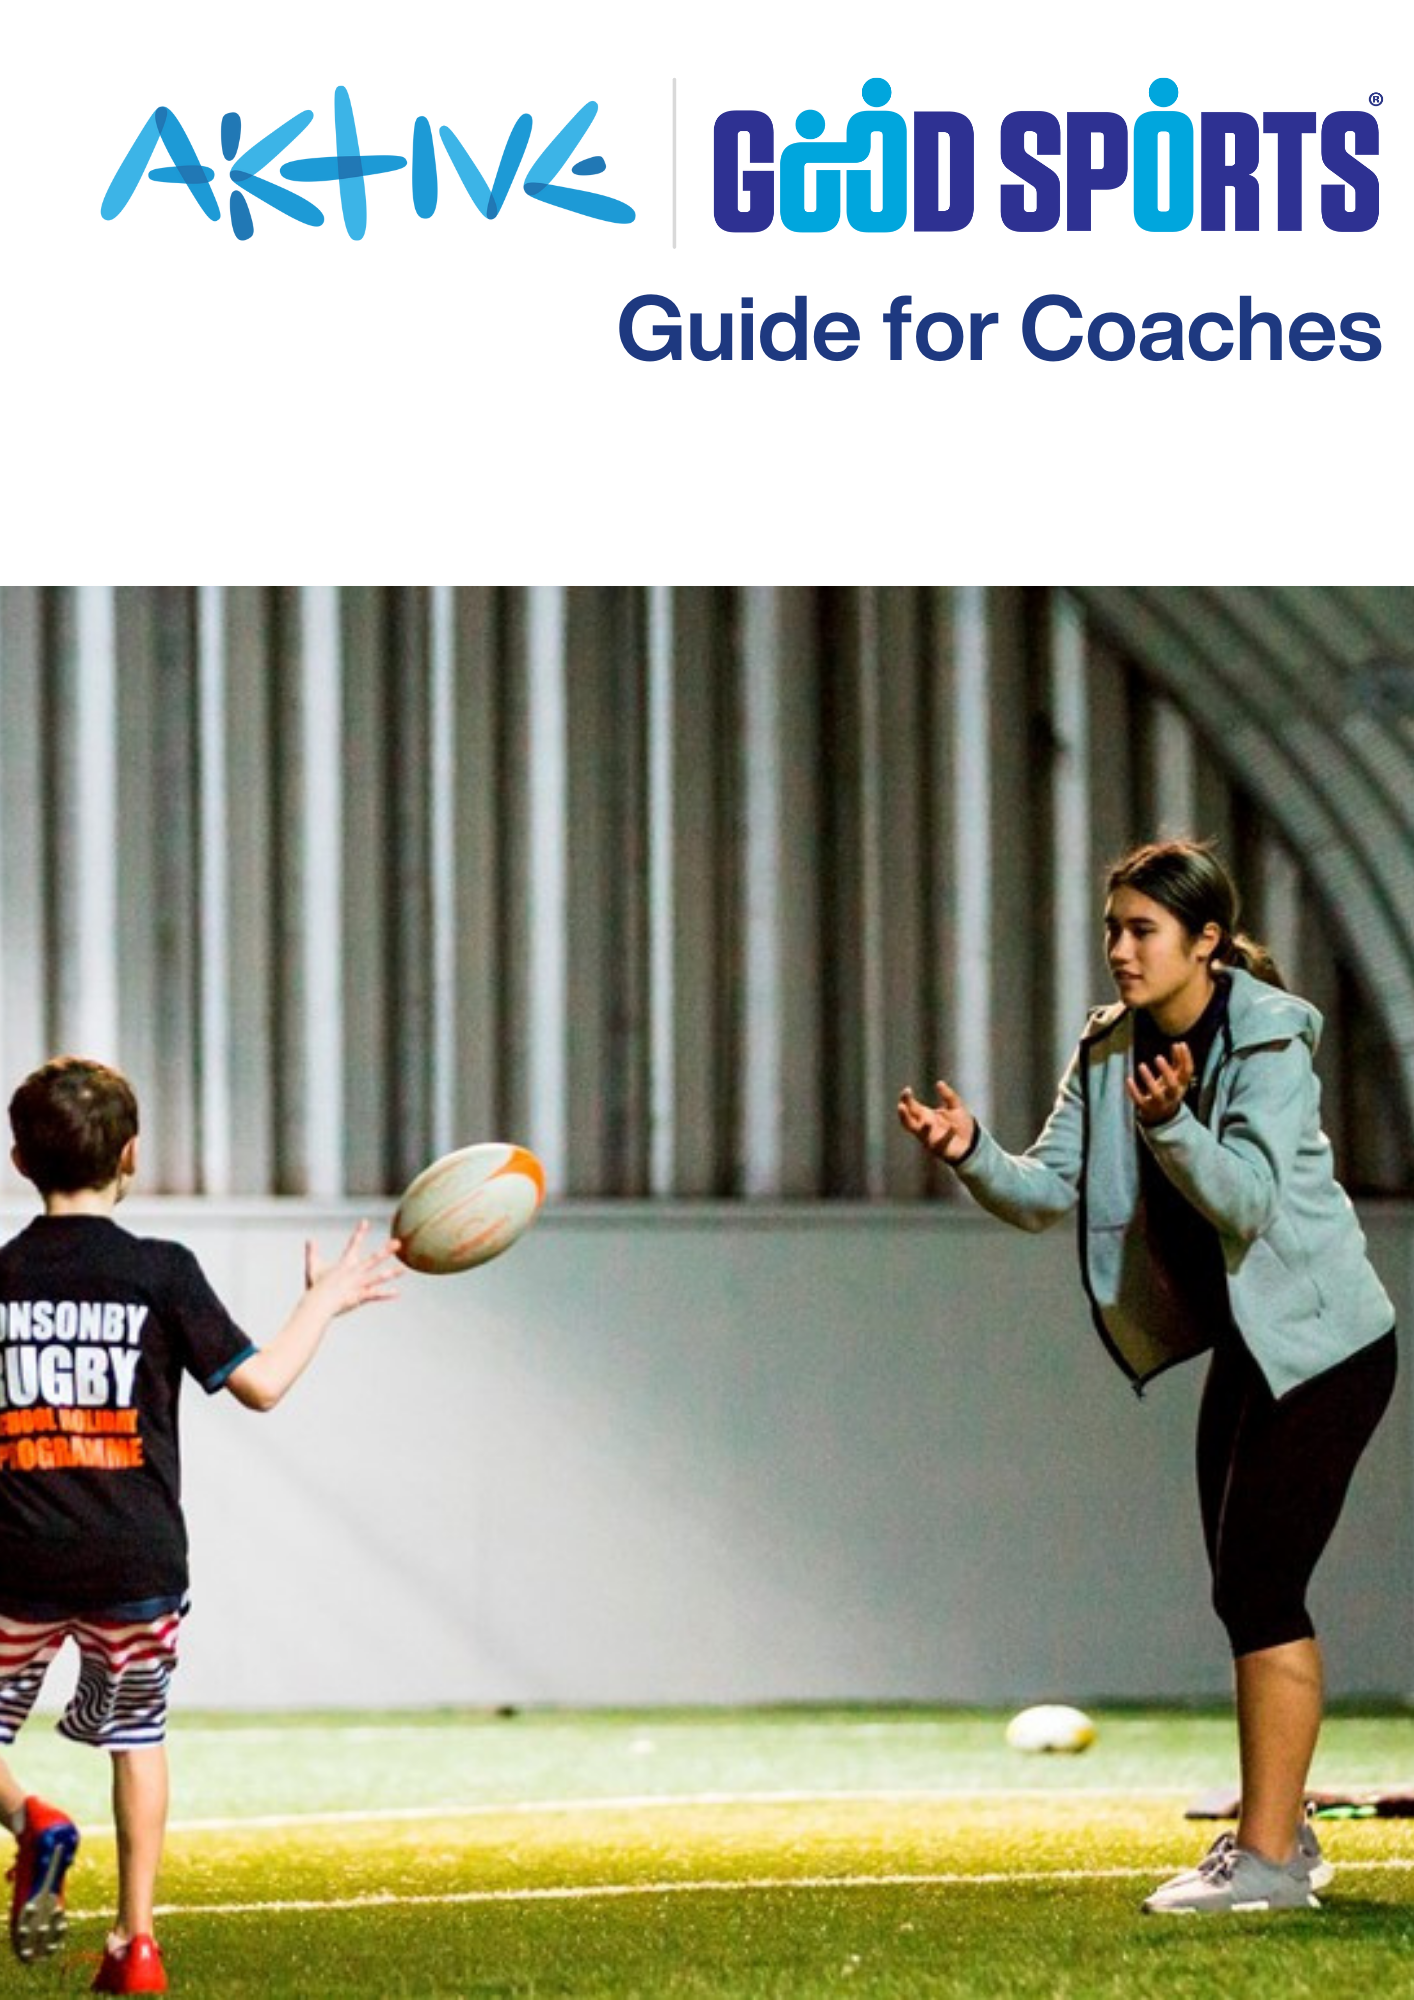 Good Sports Guide For Coaches